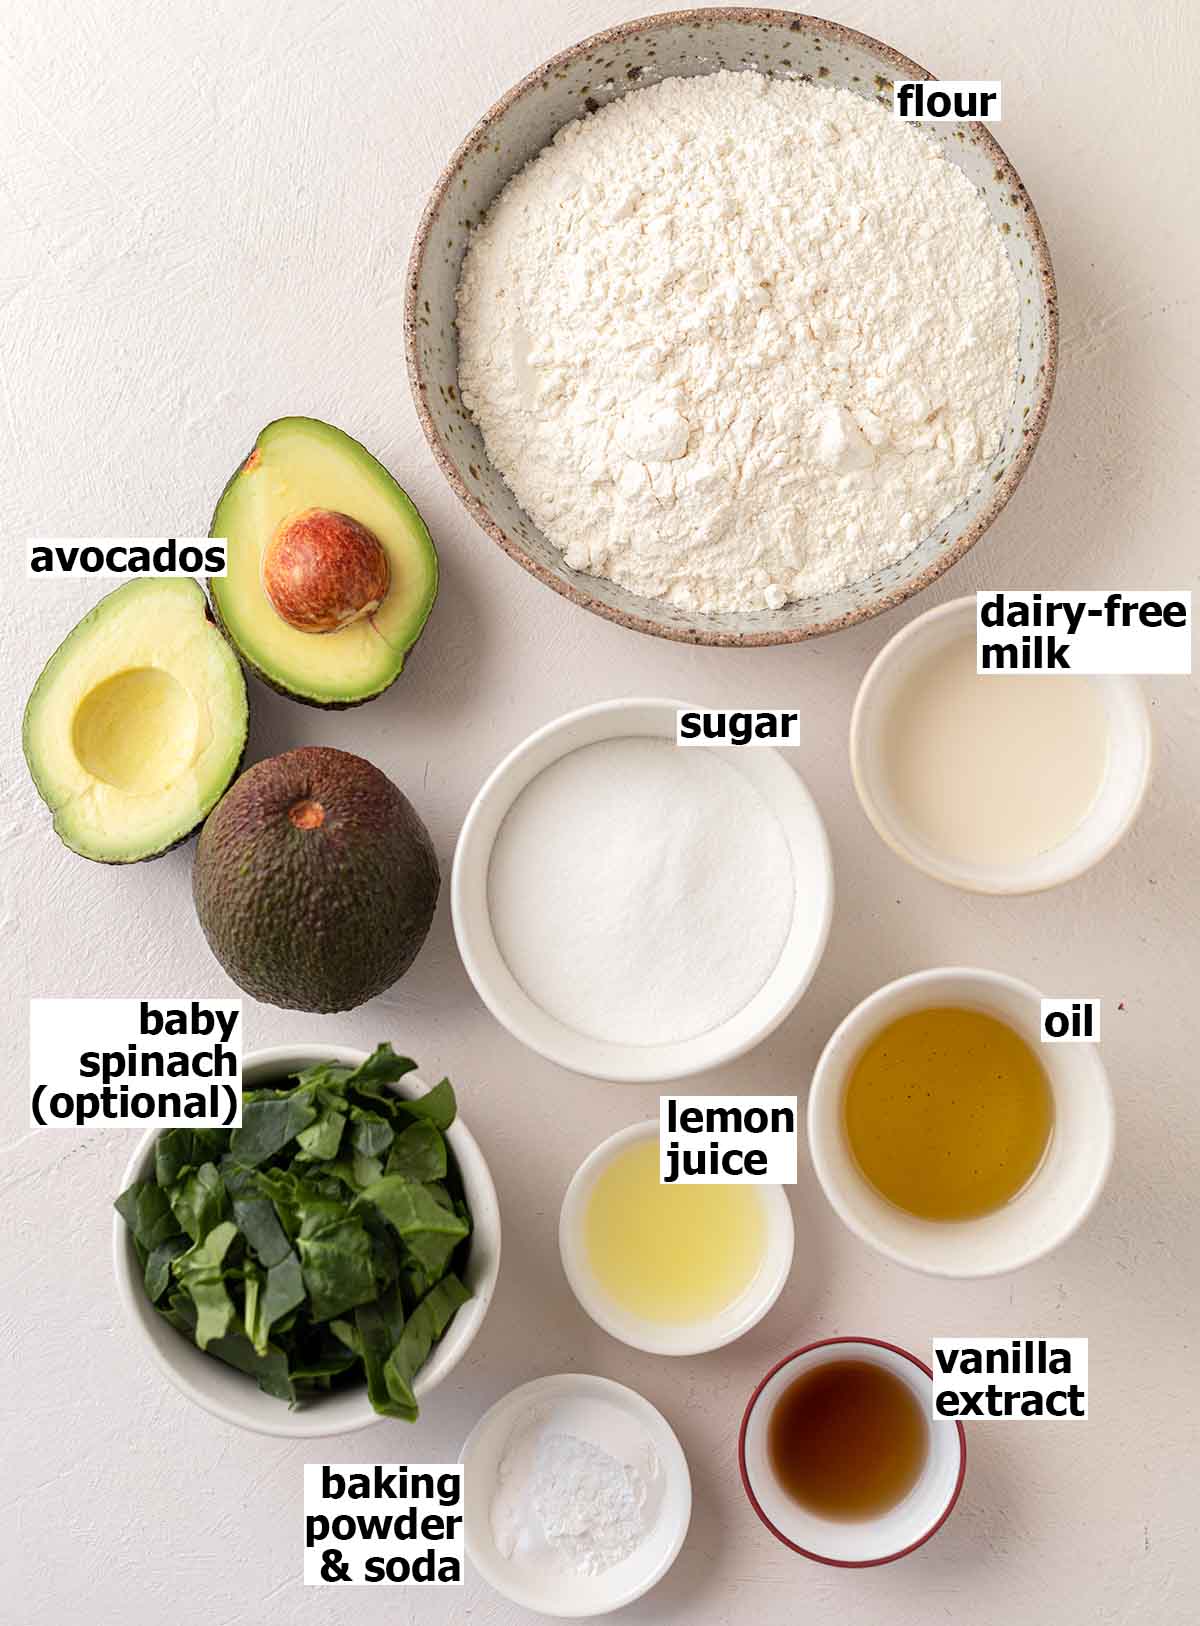 Flat-lay of ingredients for avocado muffins